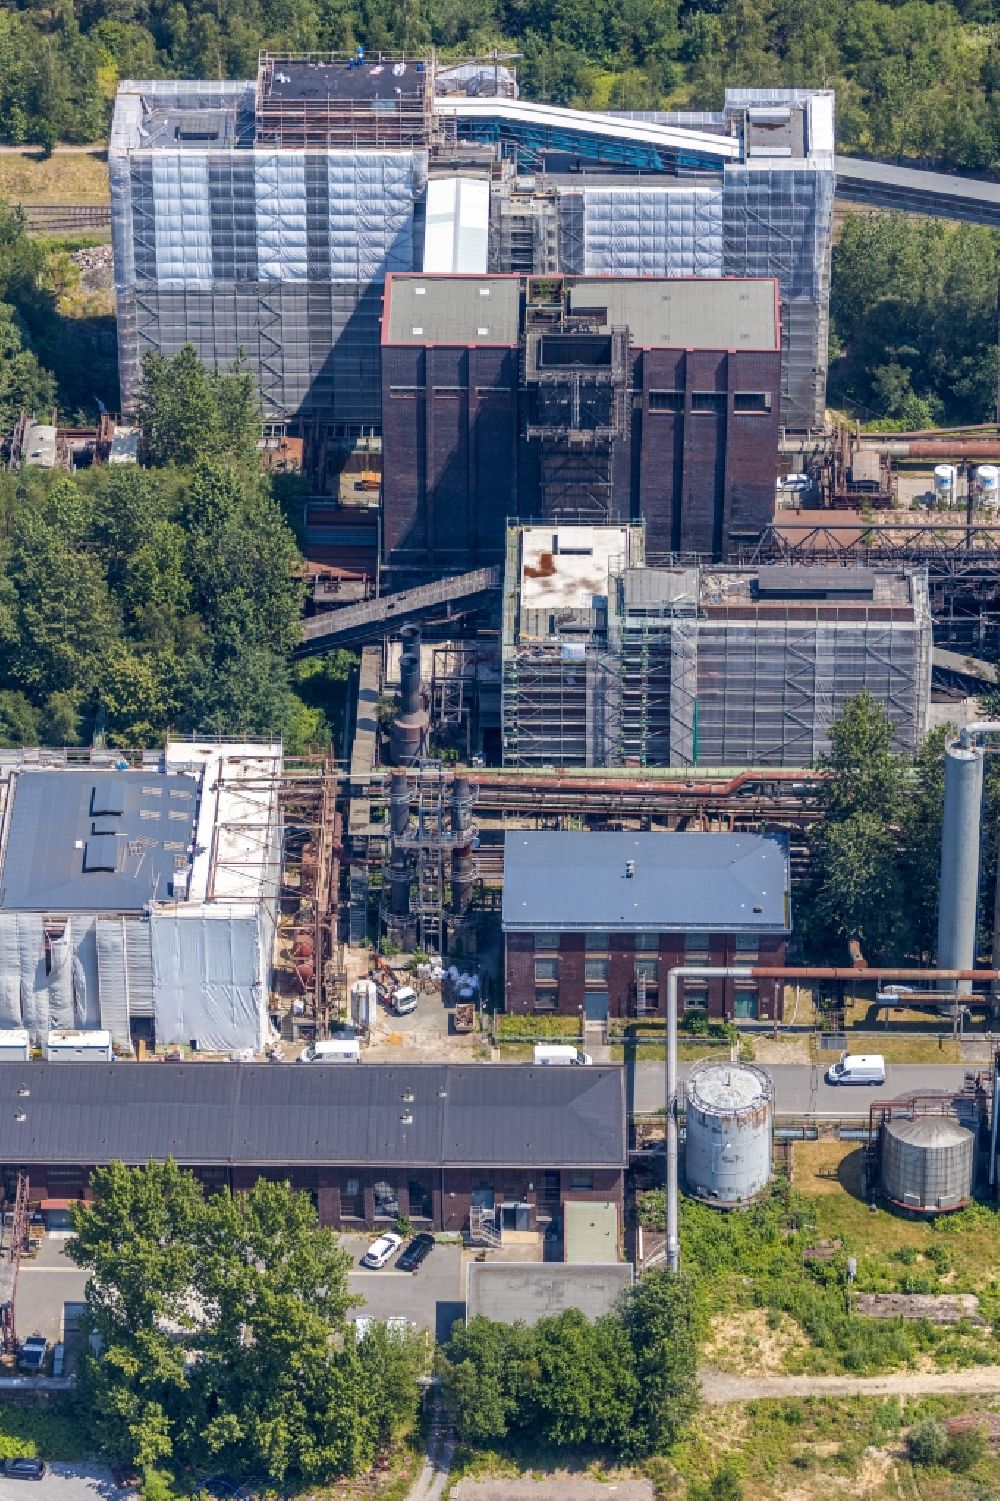 Aerial photograph Dortmund - Industrial monument of the disused technical facilities on the former site of the Kokerei Hansa in Dortmund in the state North Rhine-Westphalia, Germany